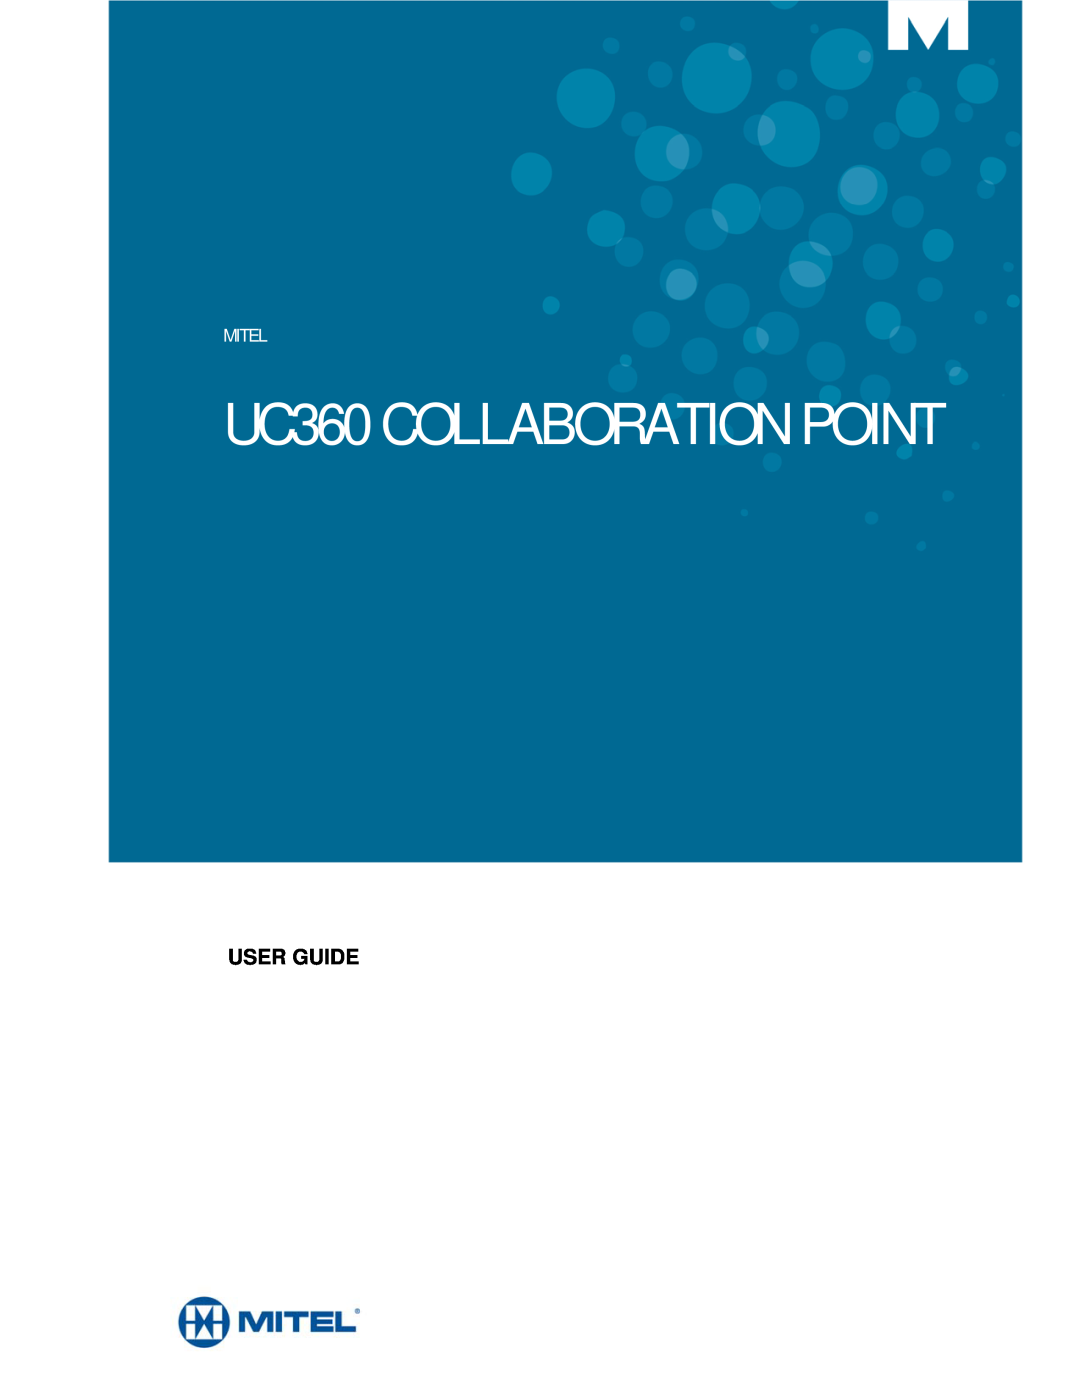 Mitel manual UC360 COLLABORATION POINT - QUICK REFERENCE GUIDE, Using the Keypad or Redial, Using Contacts 